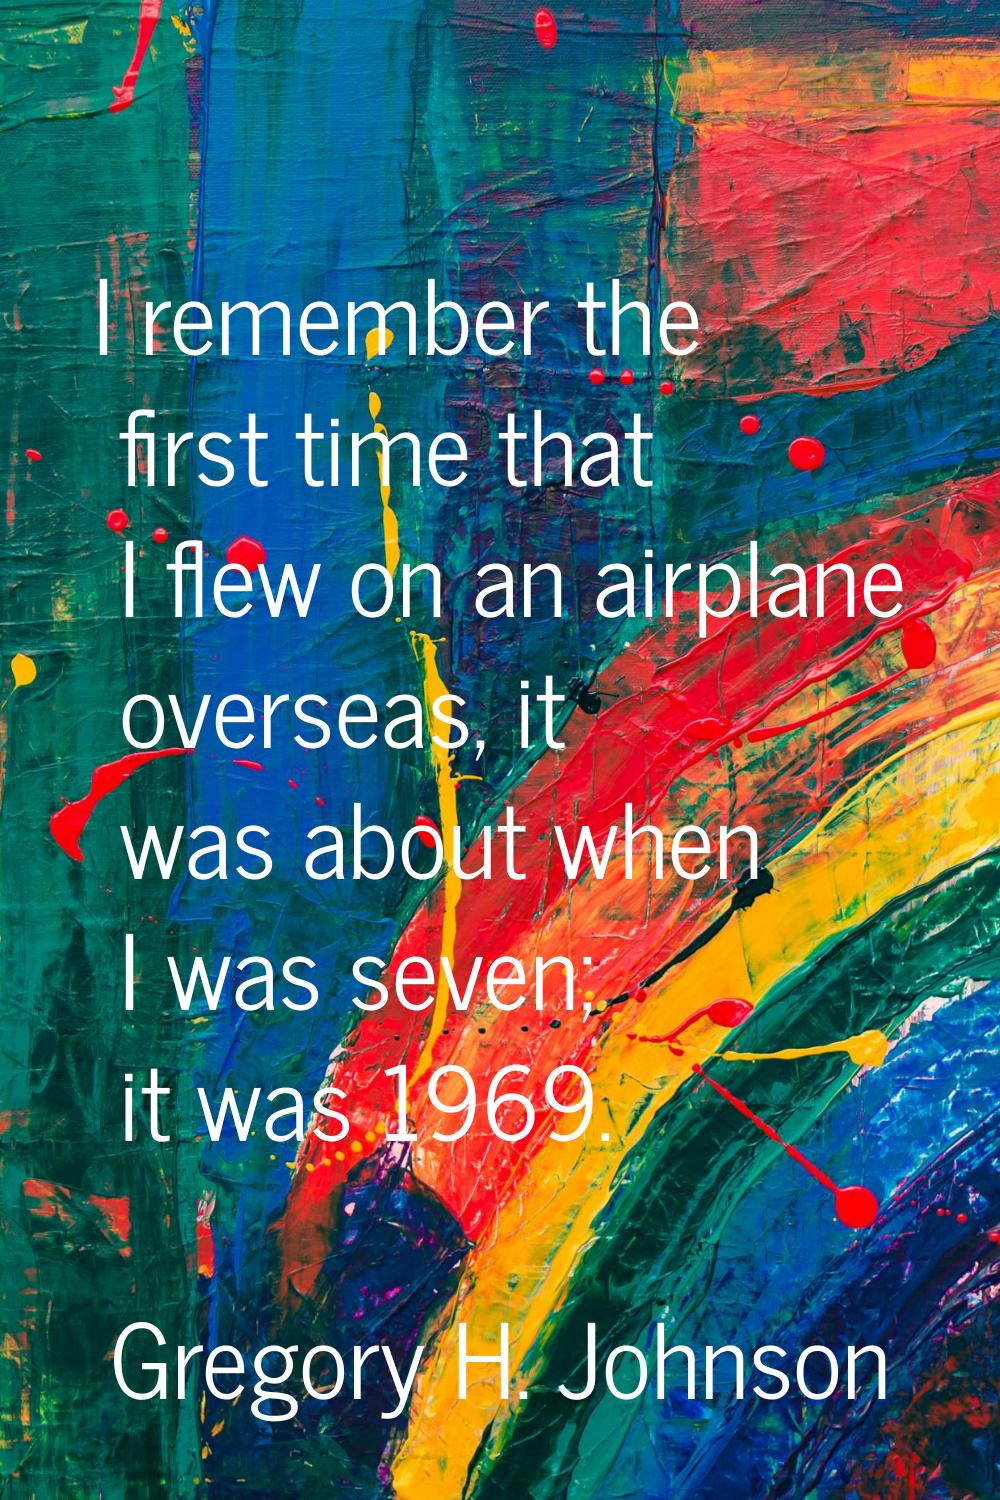 I remember the first time that I flew on an airplane overseas, it was about when I was seven; it wa